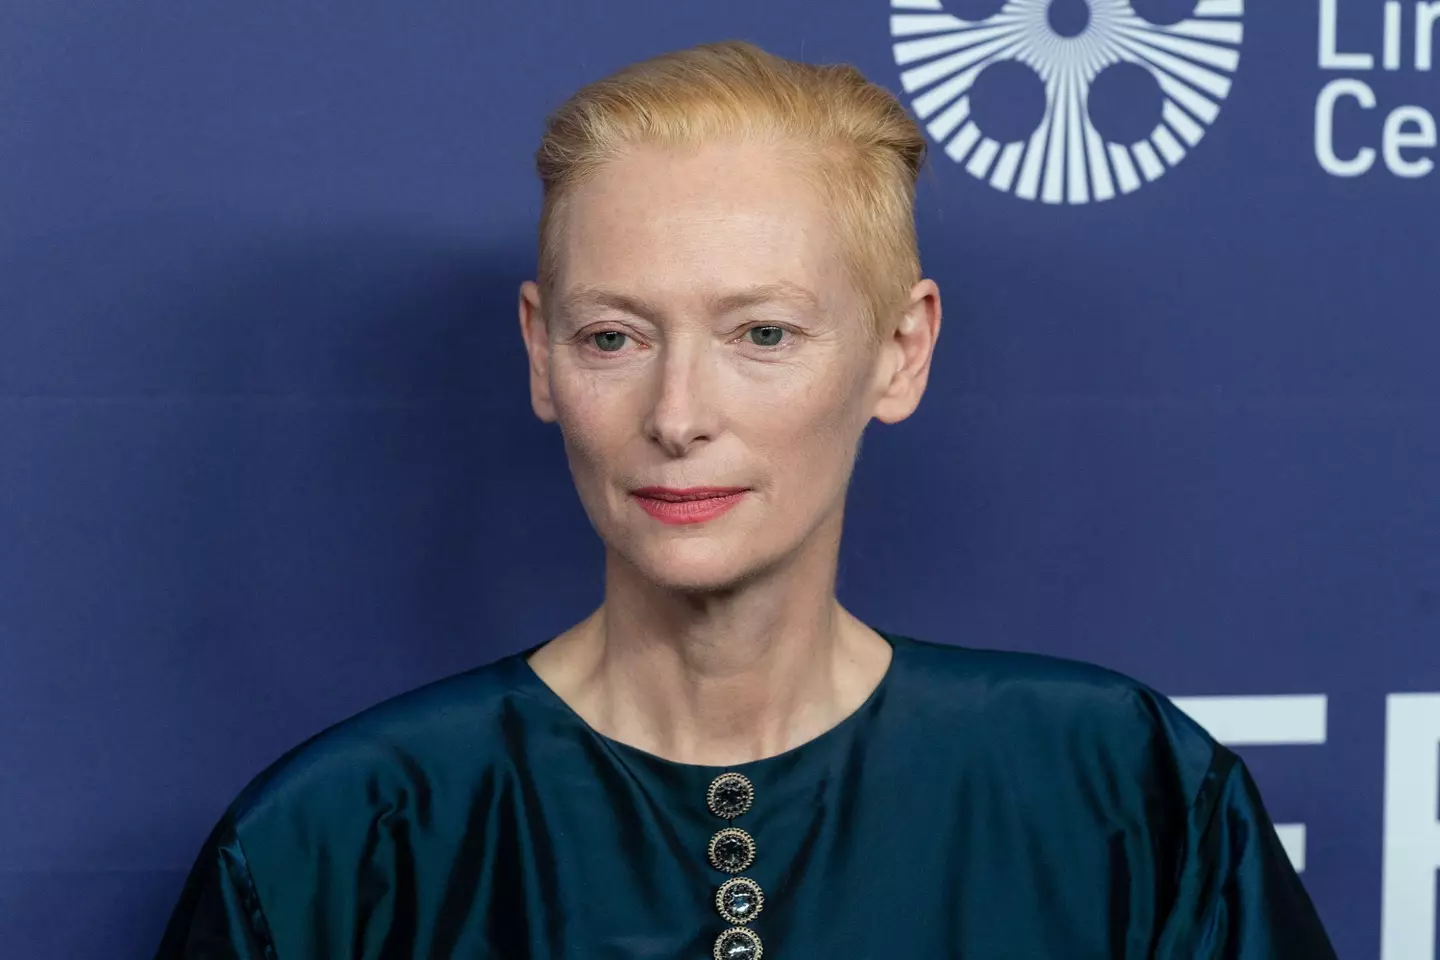 Swinton was forced to confront a troubling memory from her childhood.